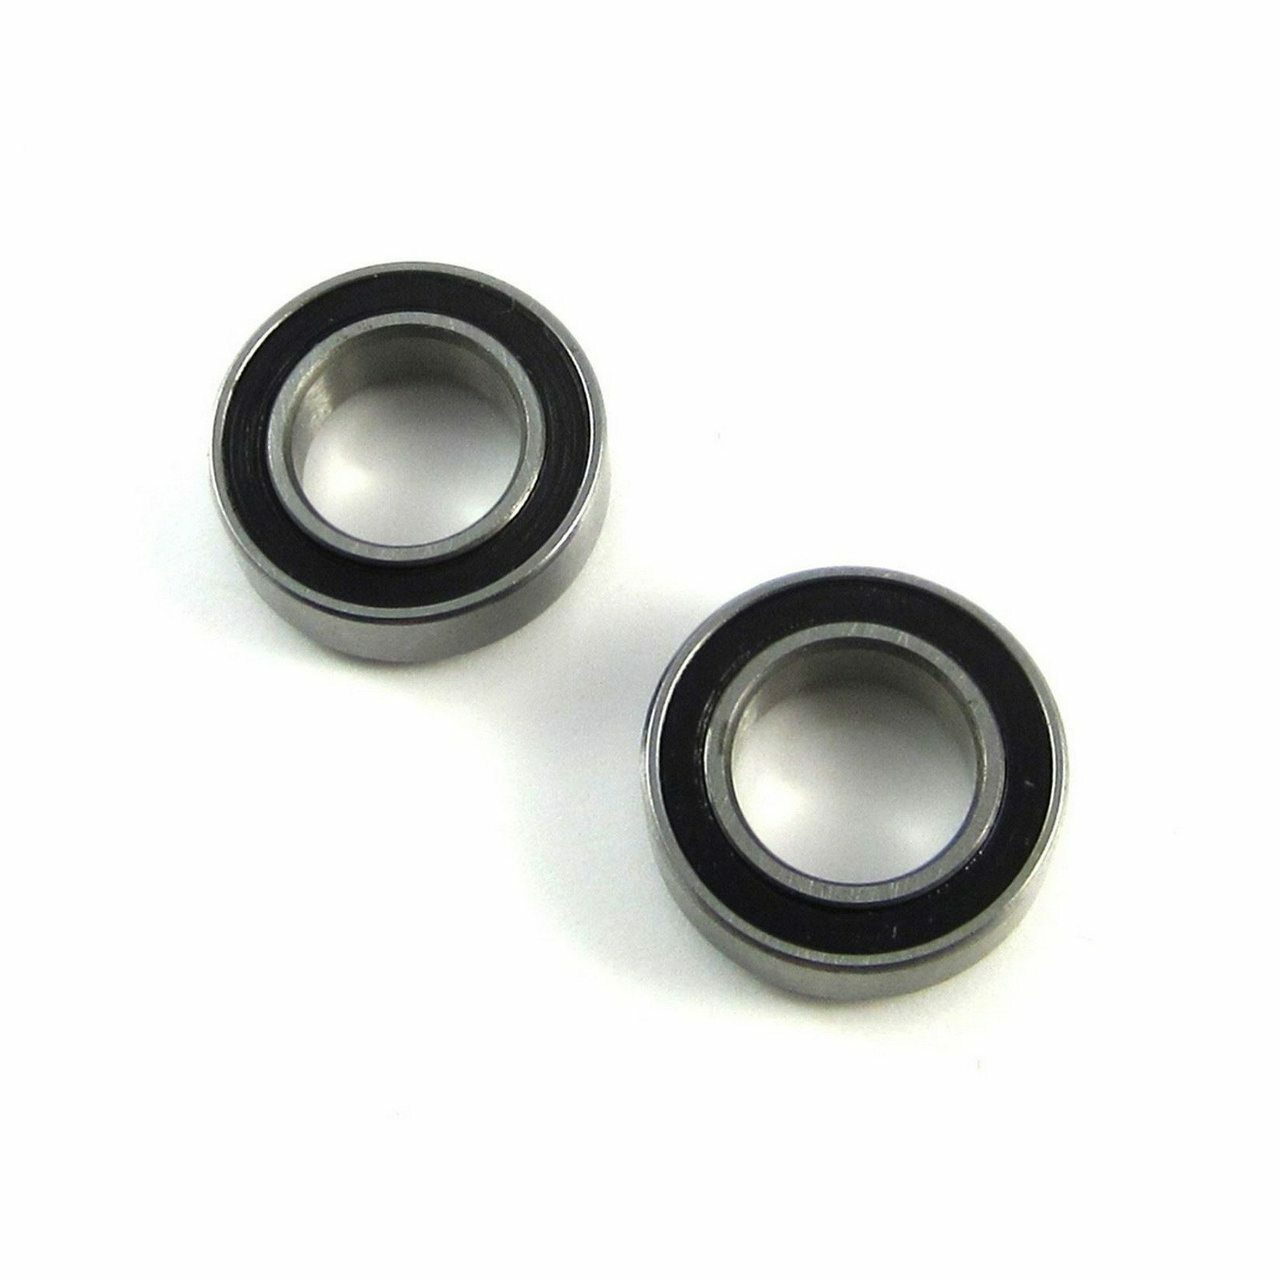 MR148-2RS 8x14x4mm Precision High Speed RC Car Ball Bearing, Chrome Steel (GCr15) with Black Rubber Seals ABEC-1 ABEC-3 ABEC-5